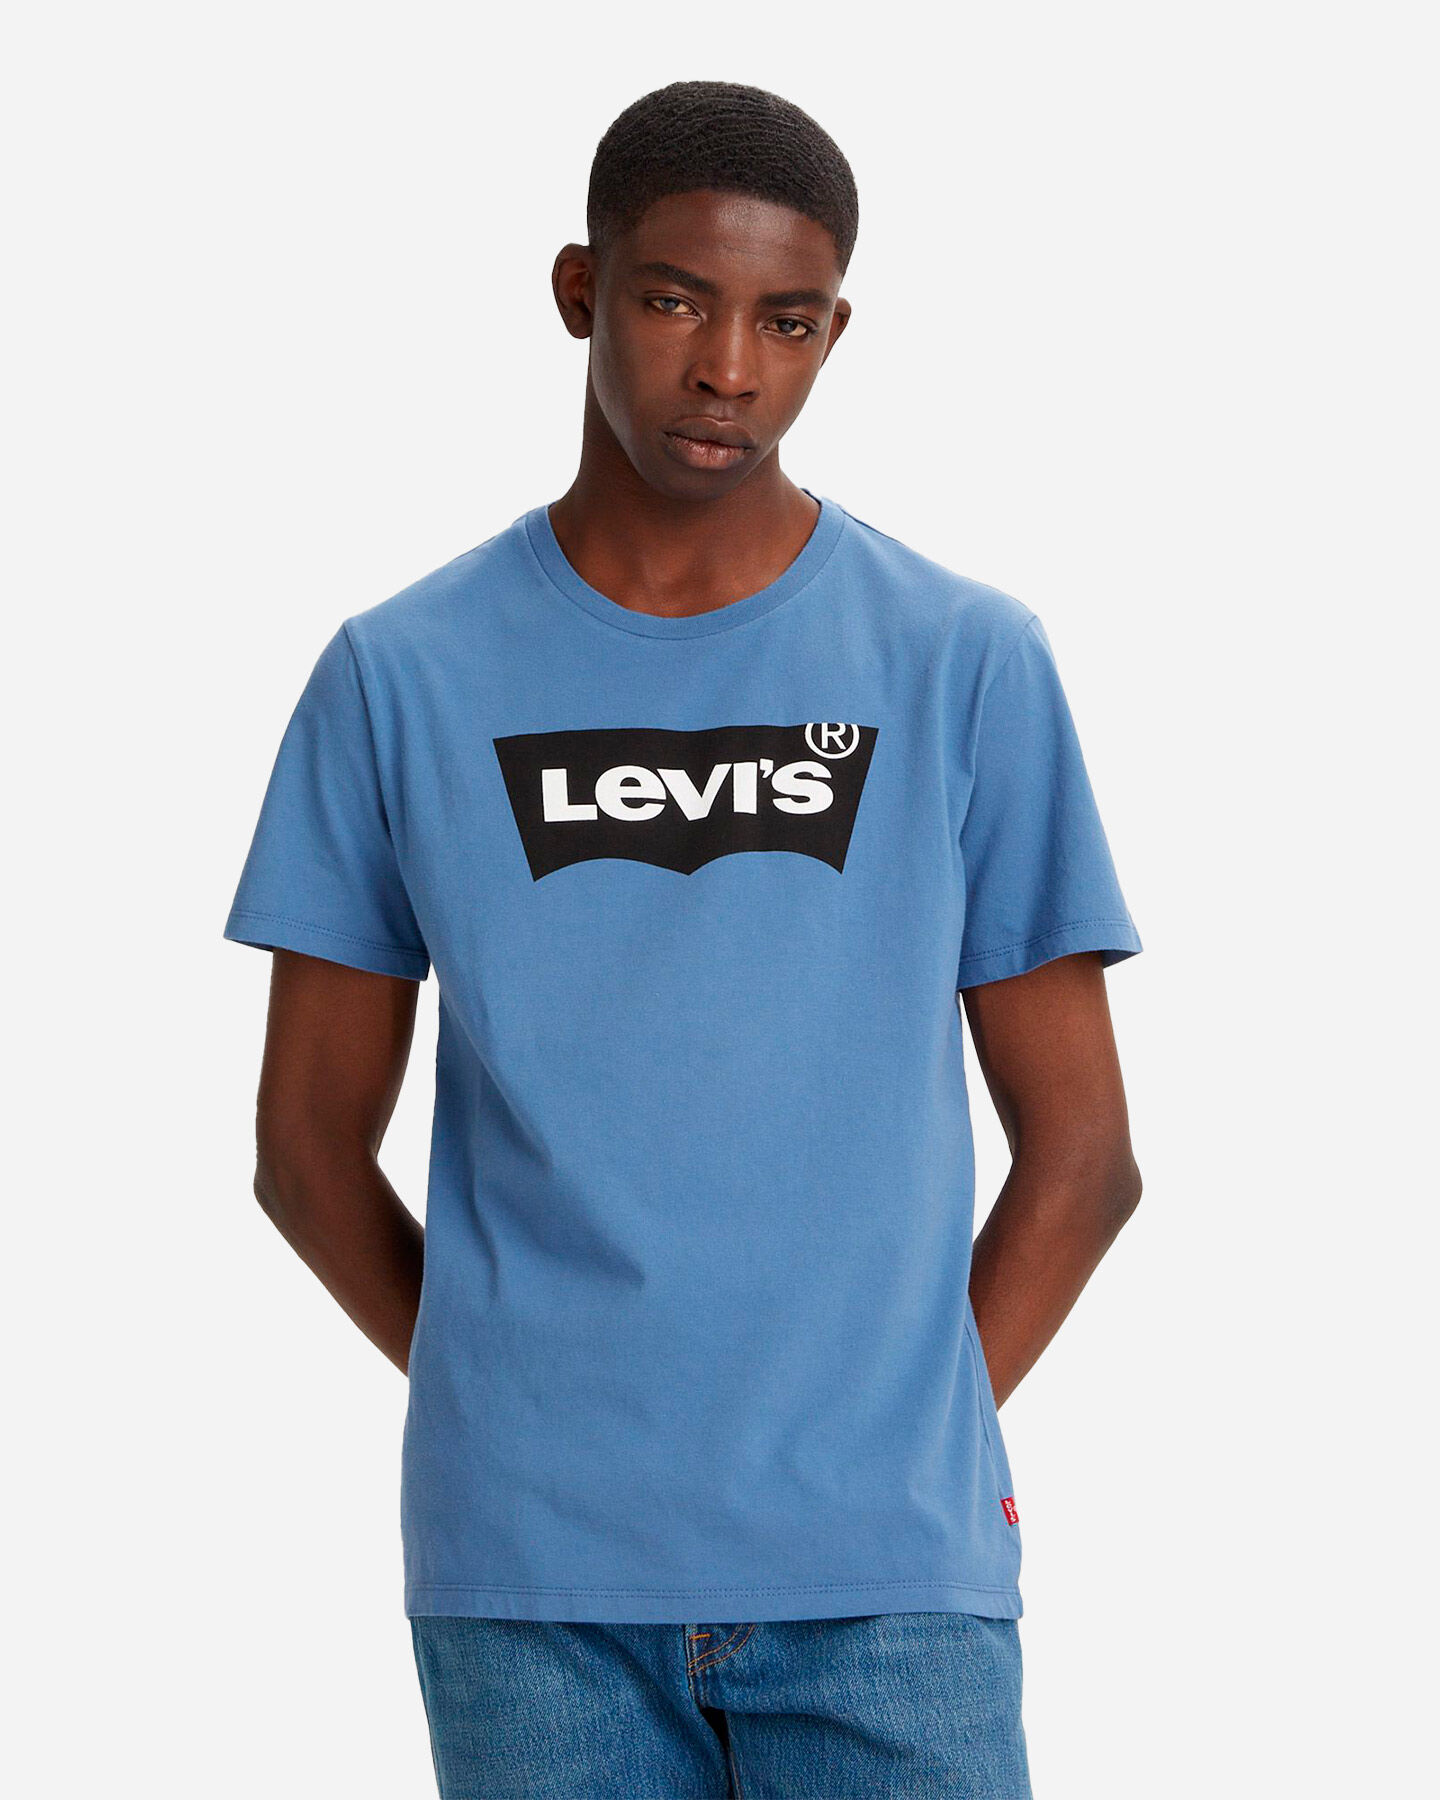  T-Shirt LEVI'S BATWING M S4113272 scatto 2